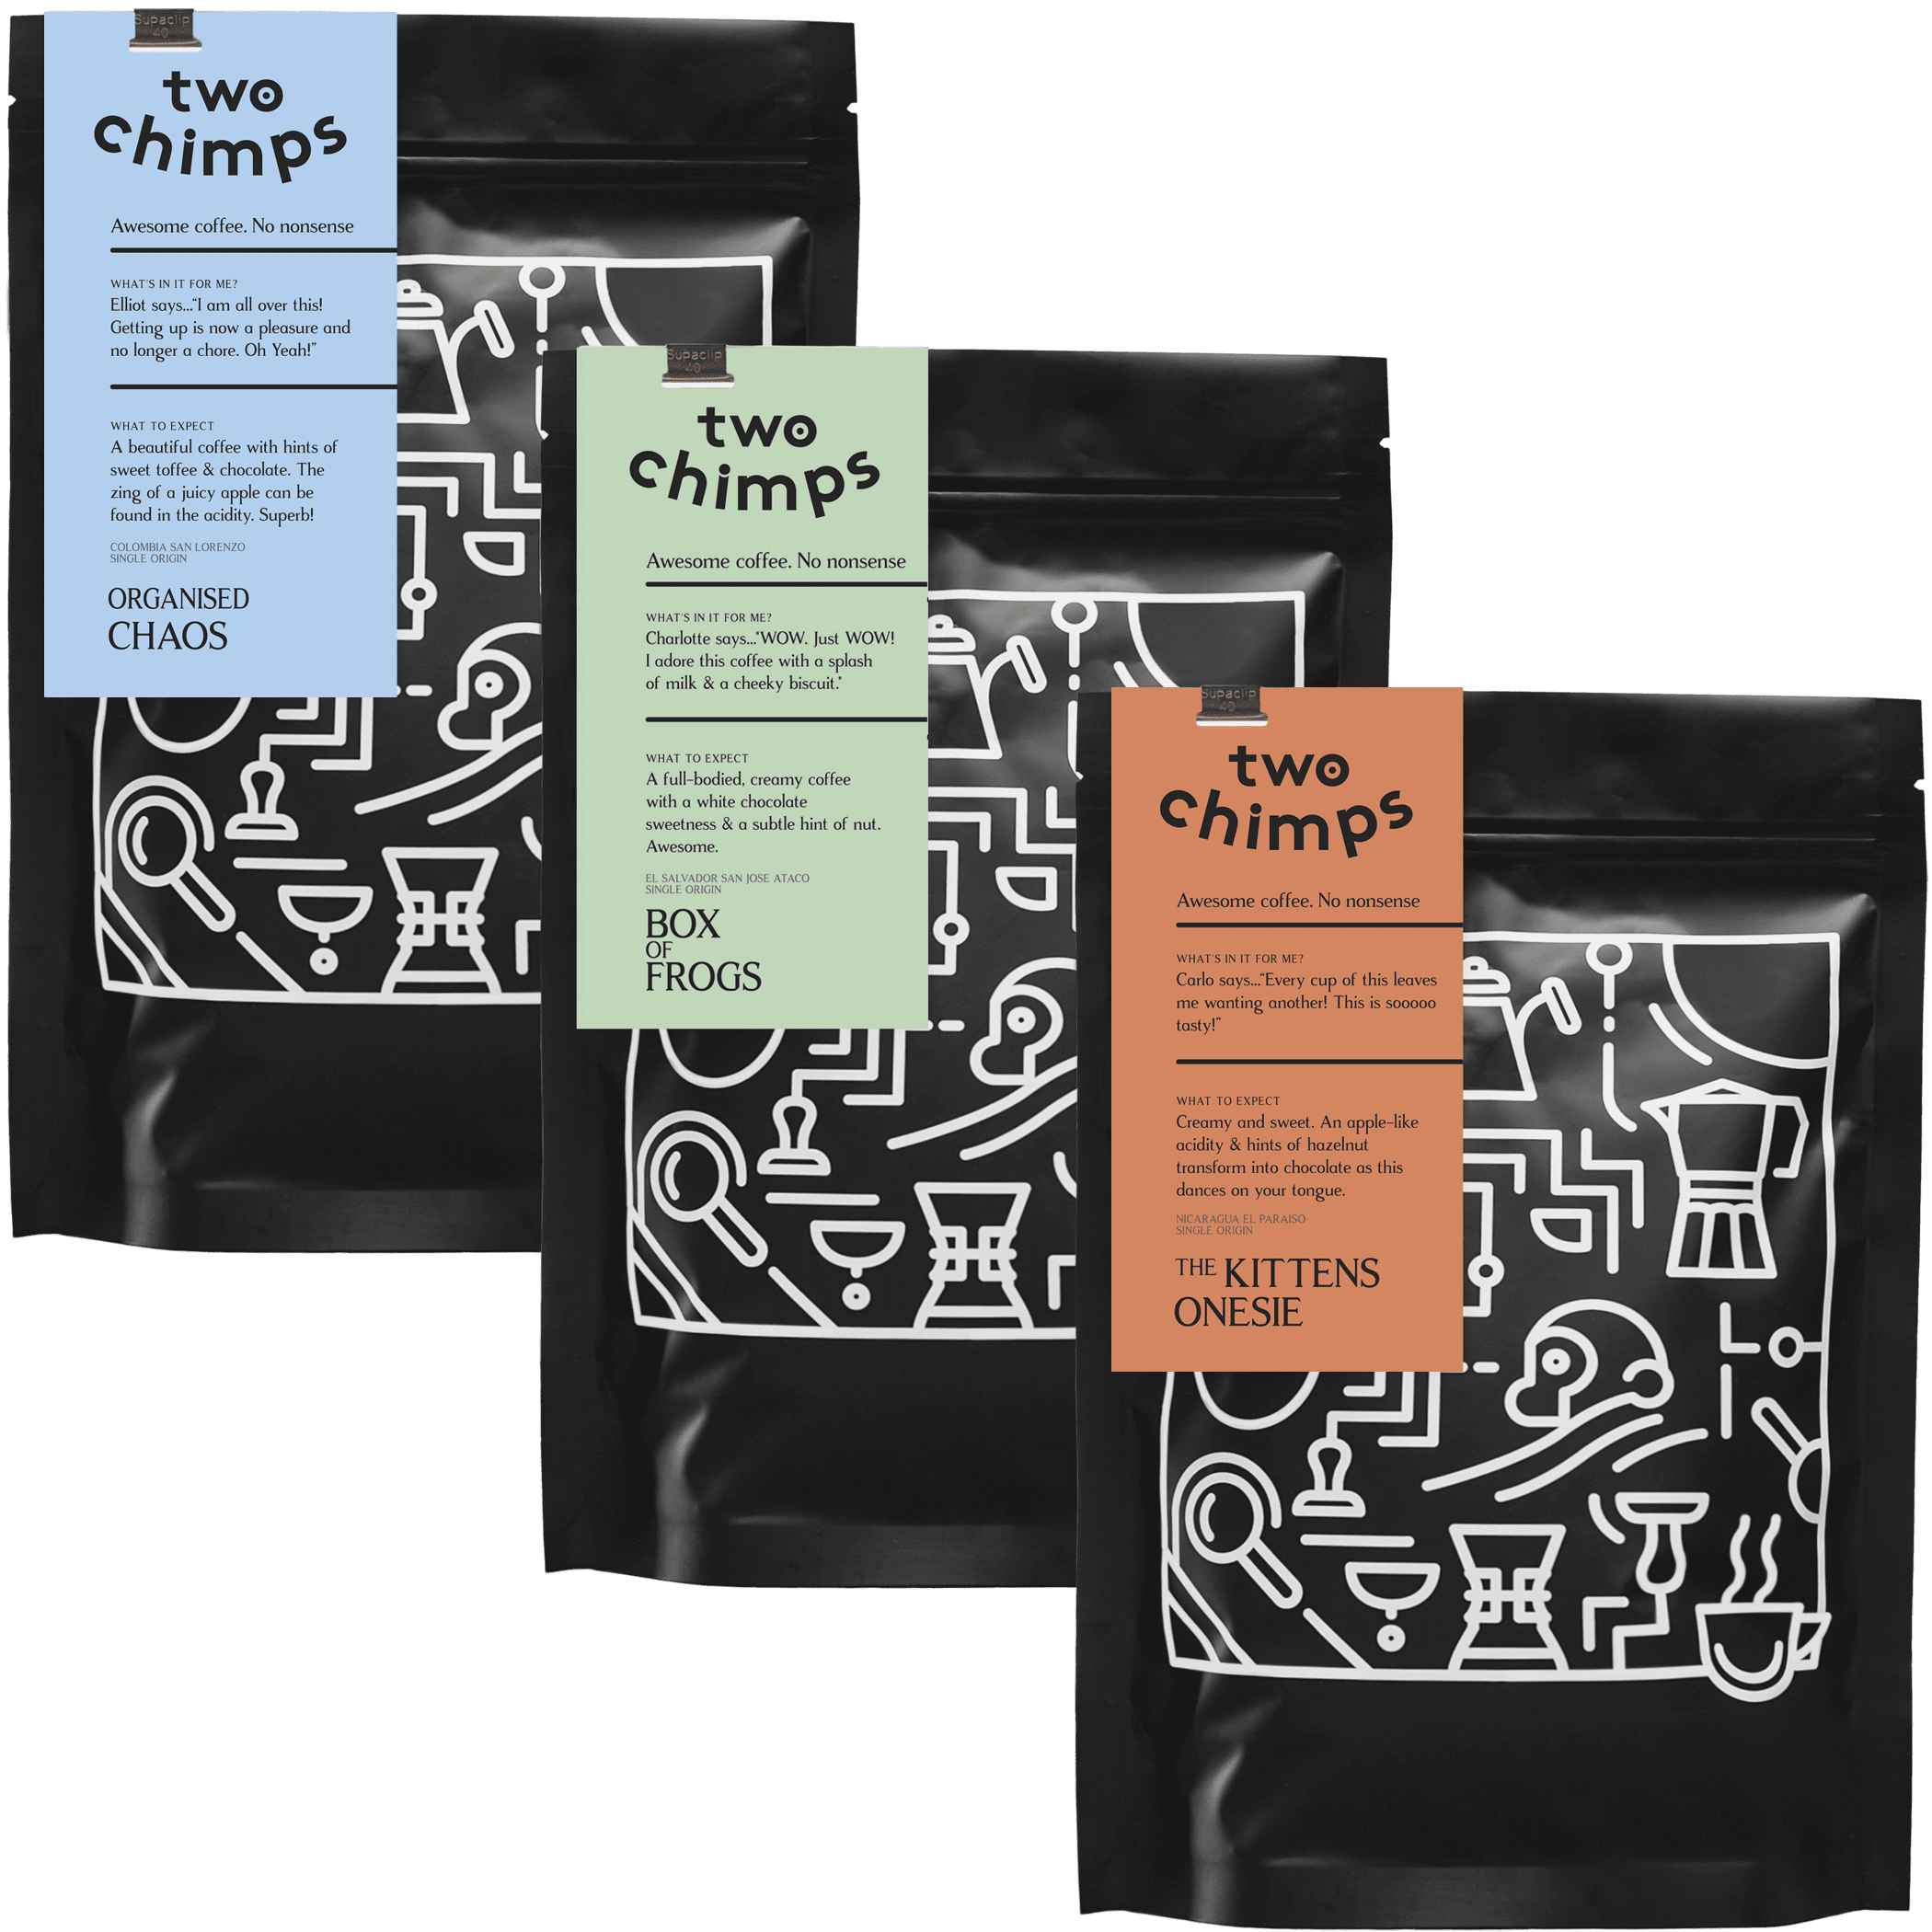 3 bags of two chimps coffee with no background